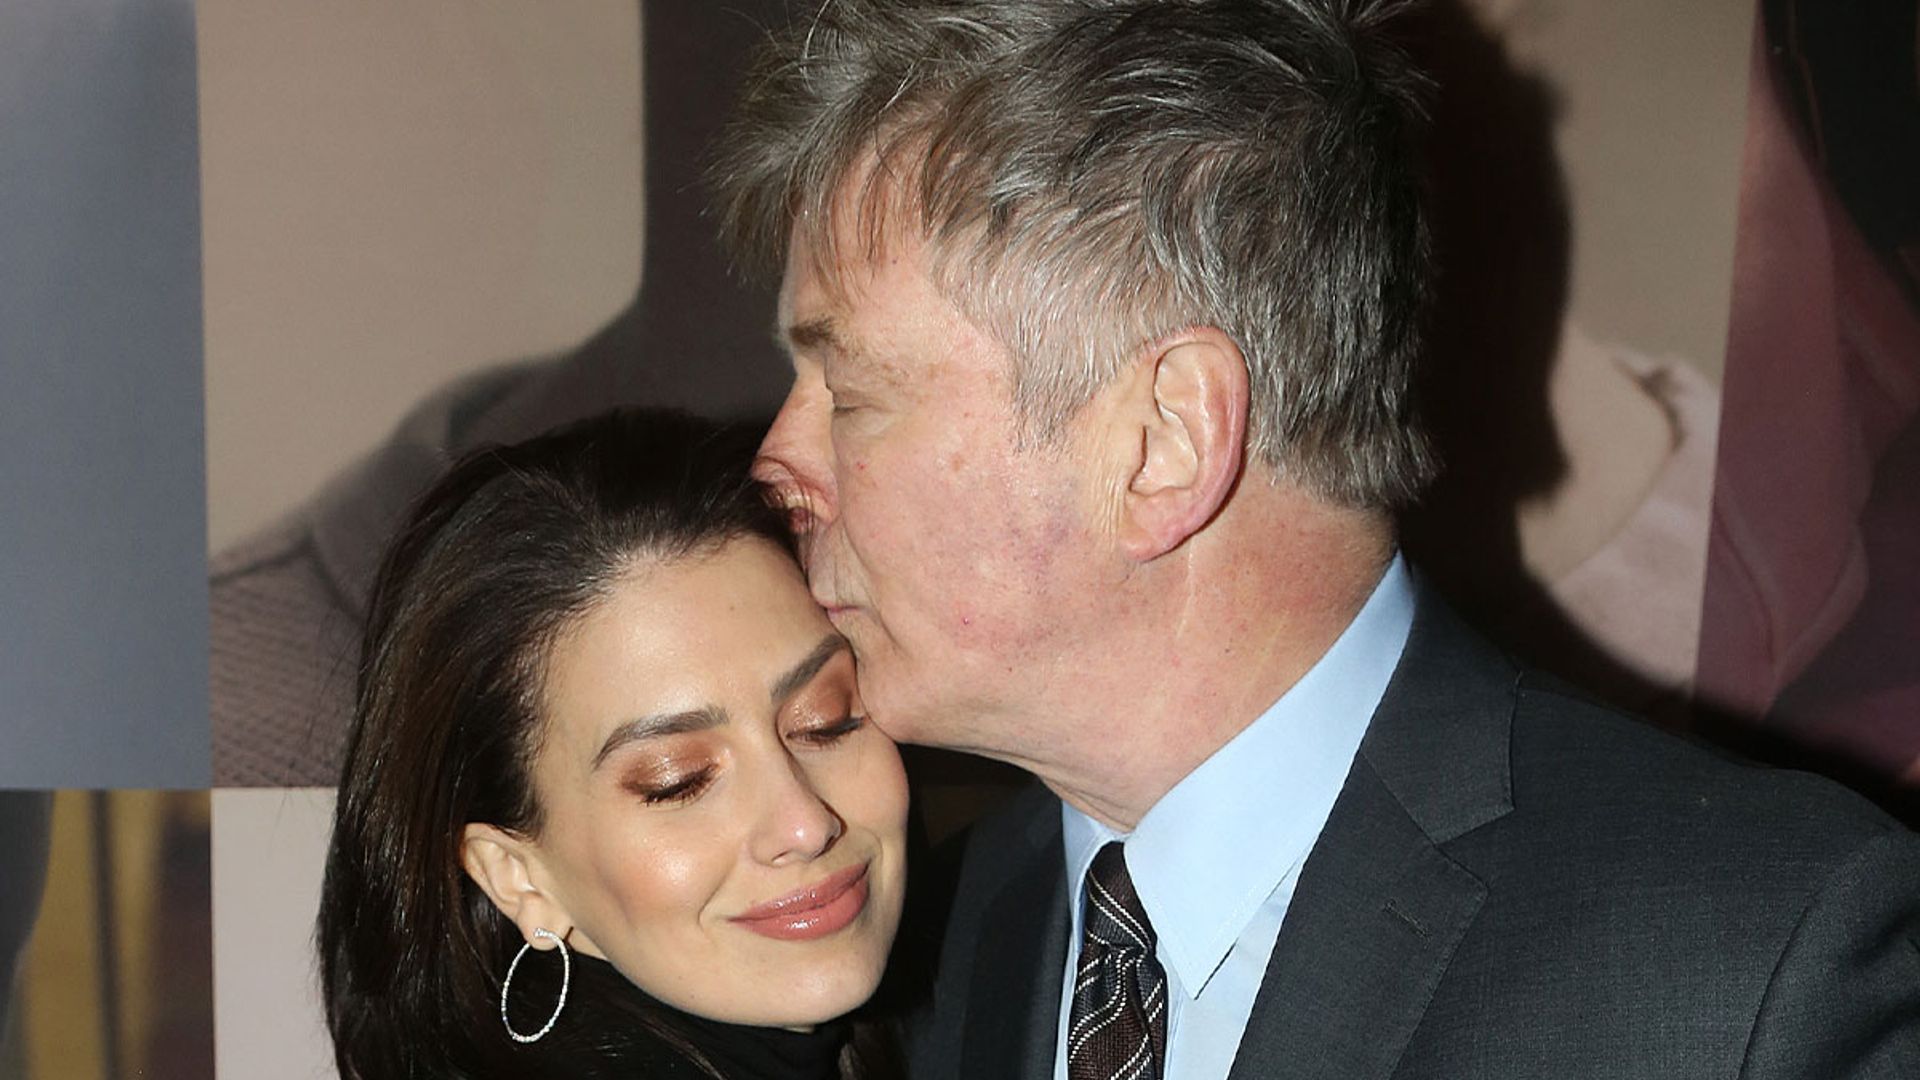 How Hilaria Baldwin is closely monitoring unborn child after previous surrogate journey